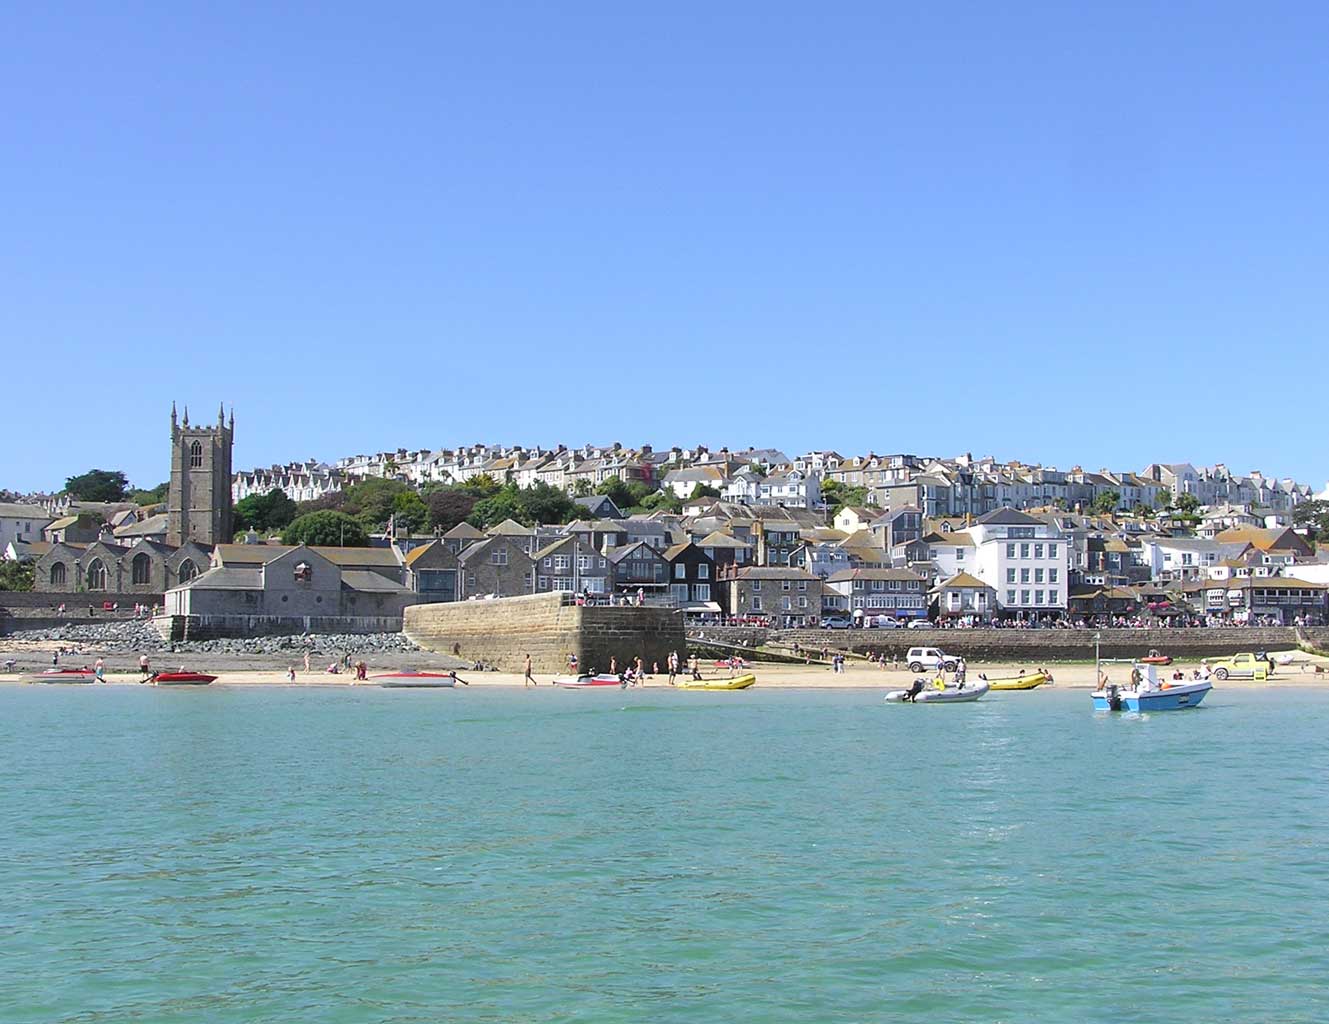 St Ives - taken from boat trip to 'Seal Island'